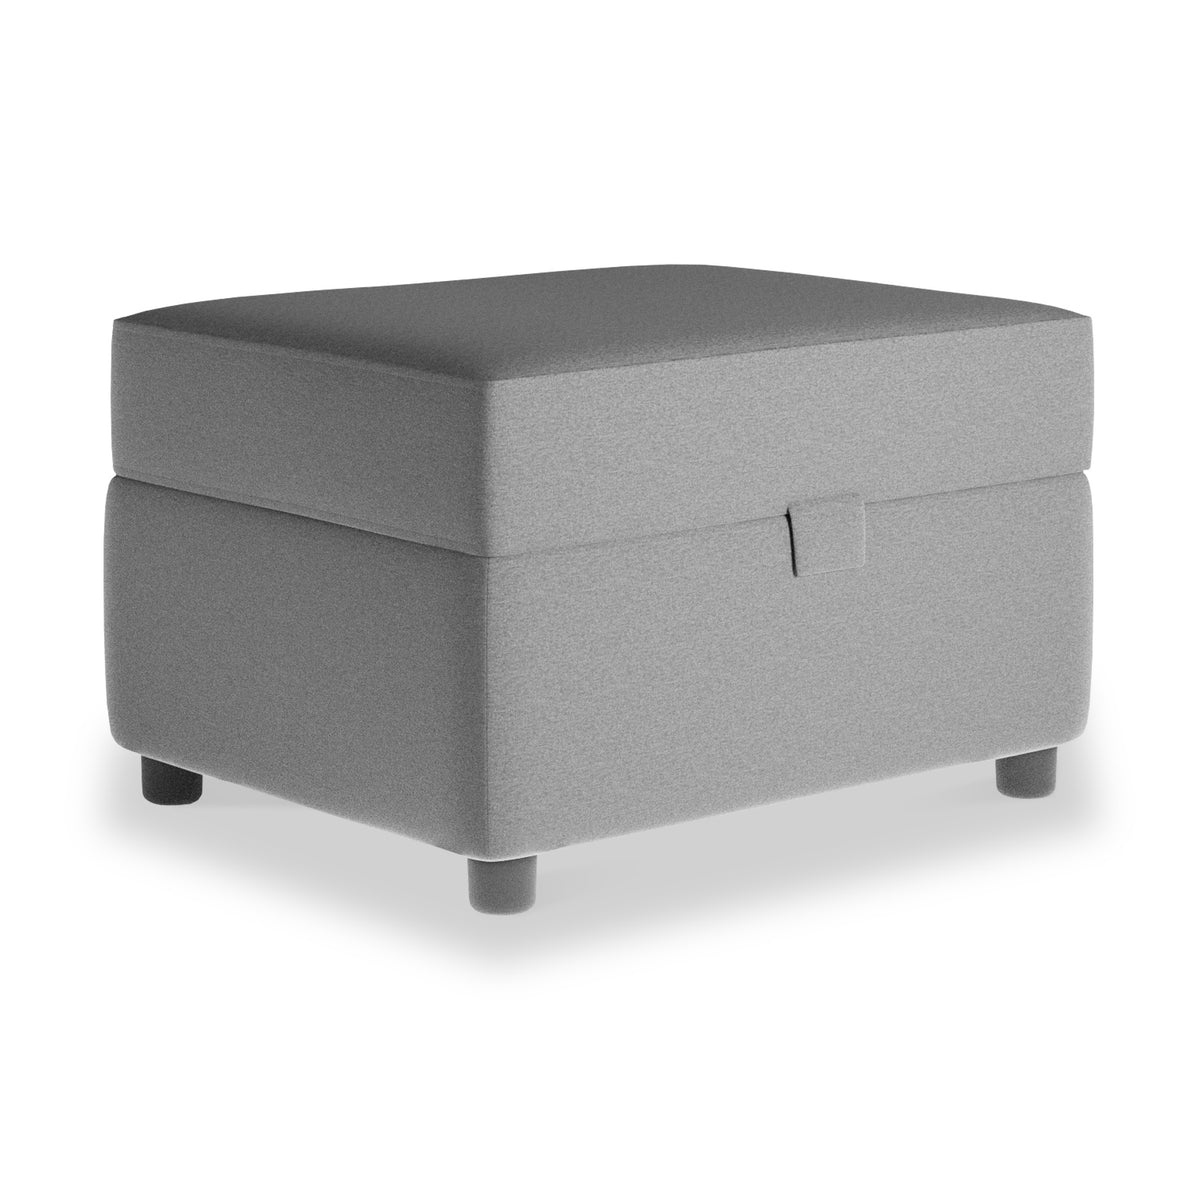 Thomas Grey Small Storage Footstool from Roseland Furniture